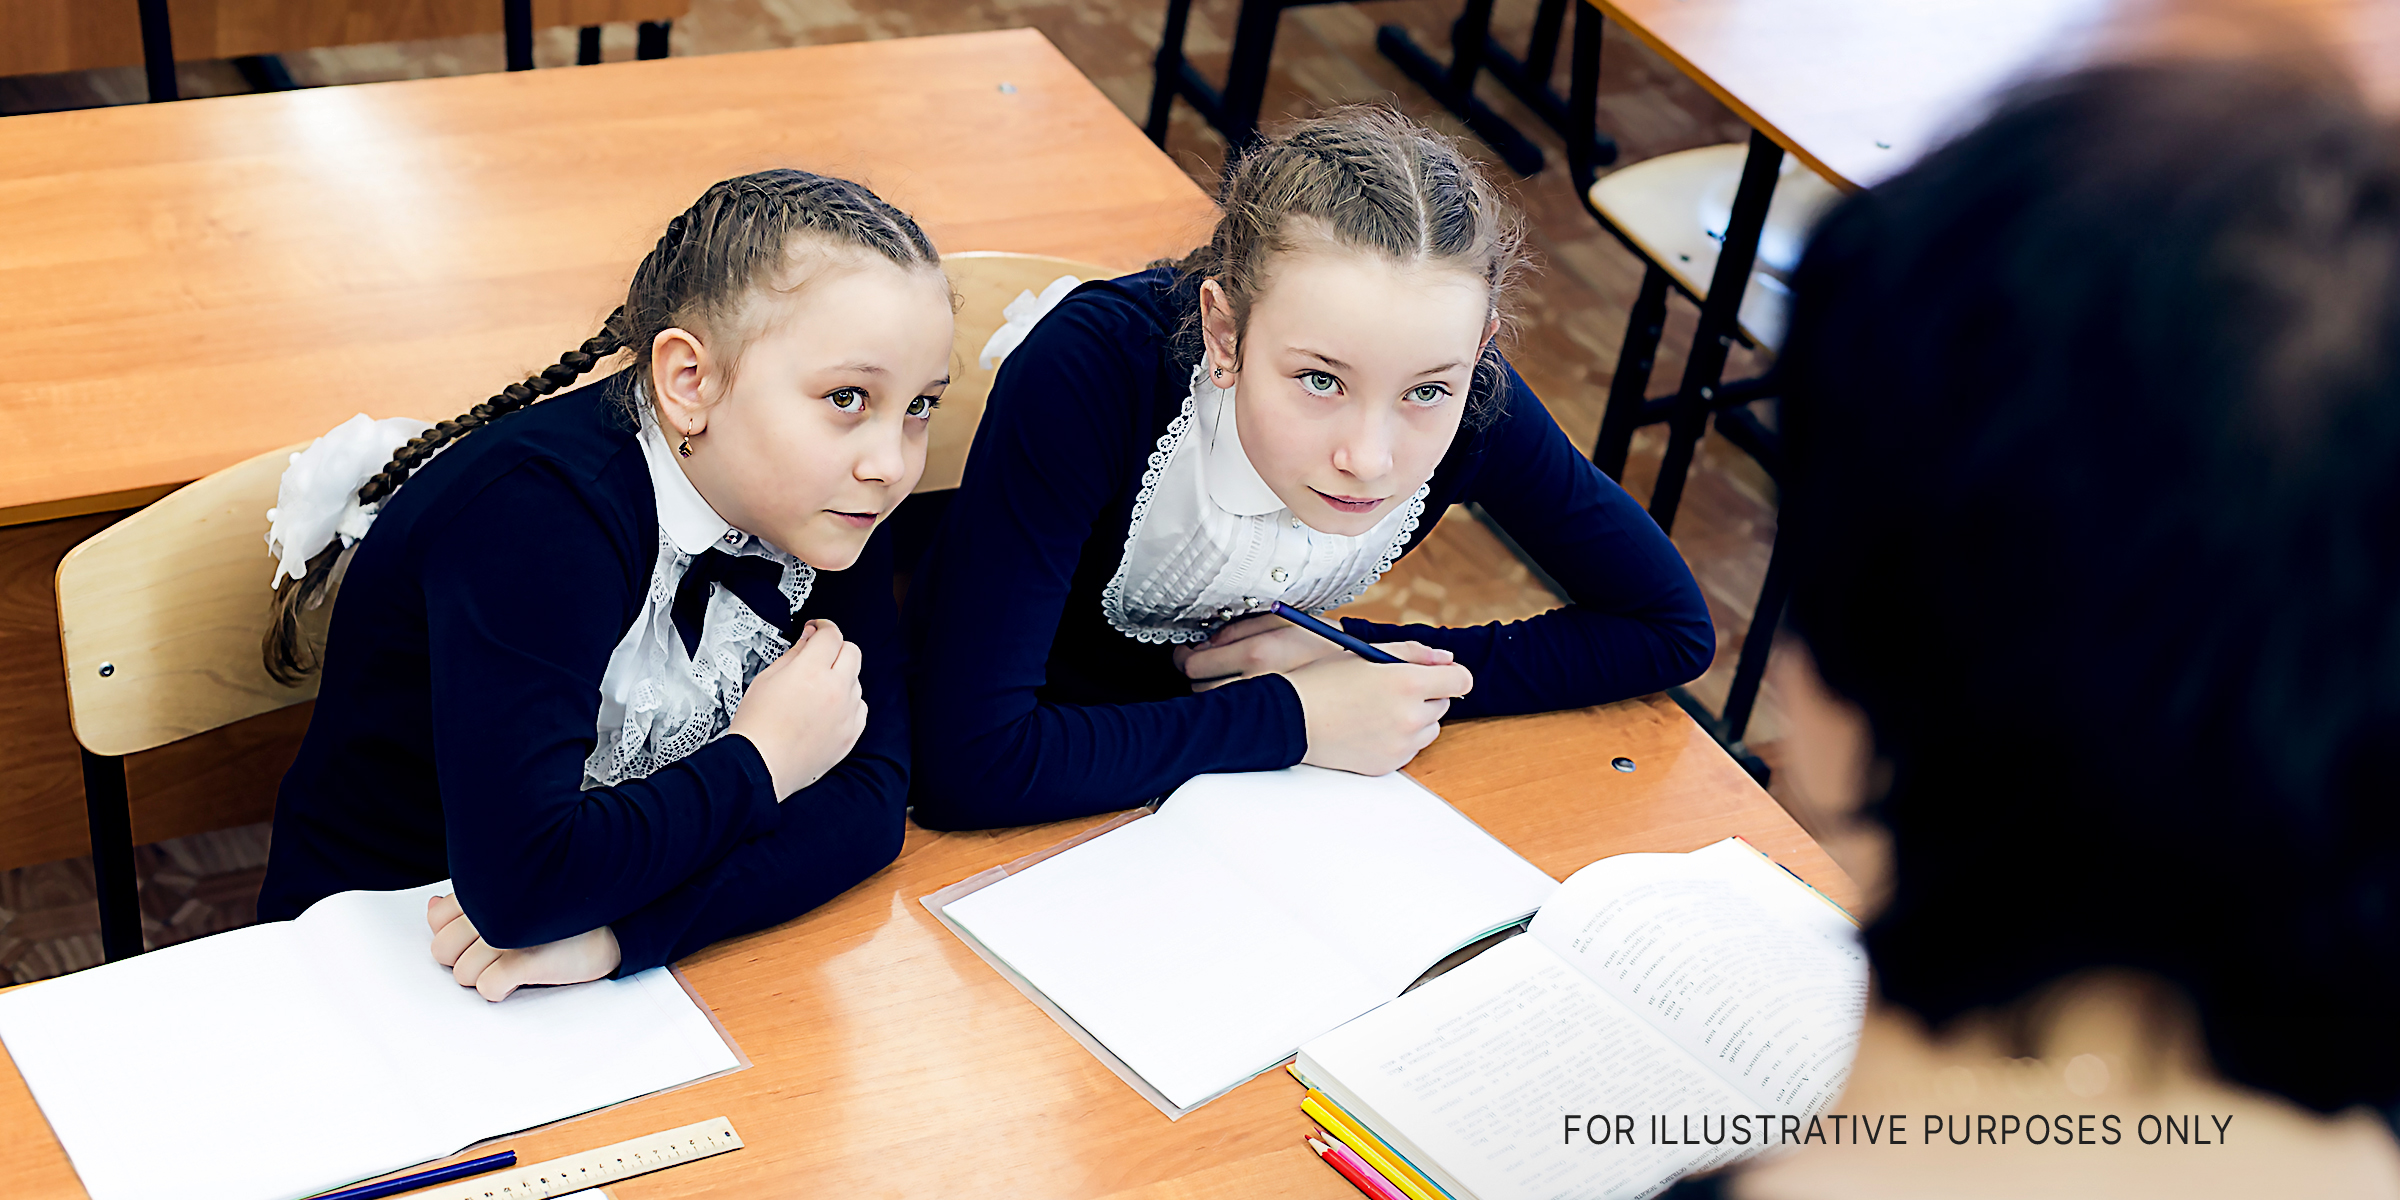 Two schoolgirls looking at a person standing in front of their desk | Source: Shutterstock